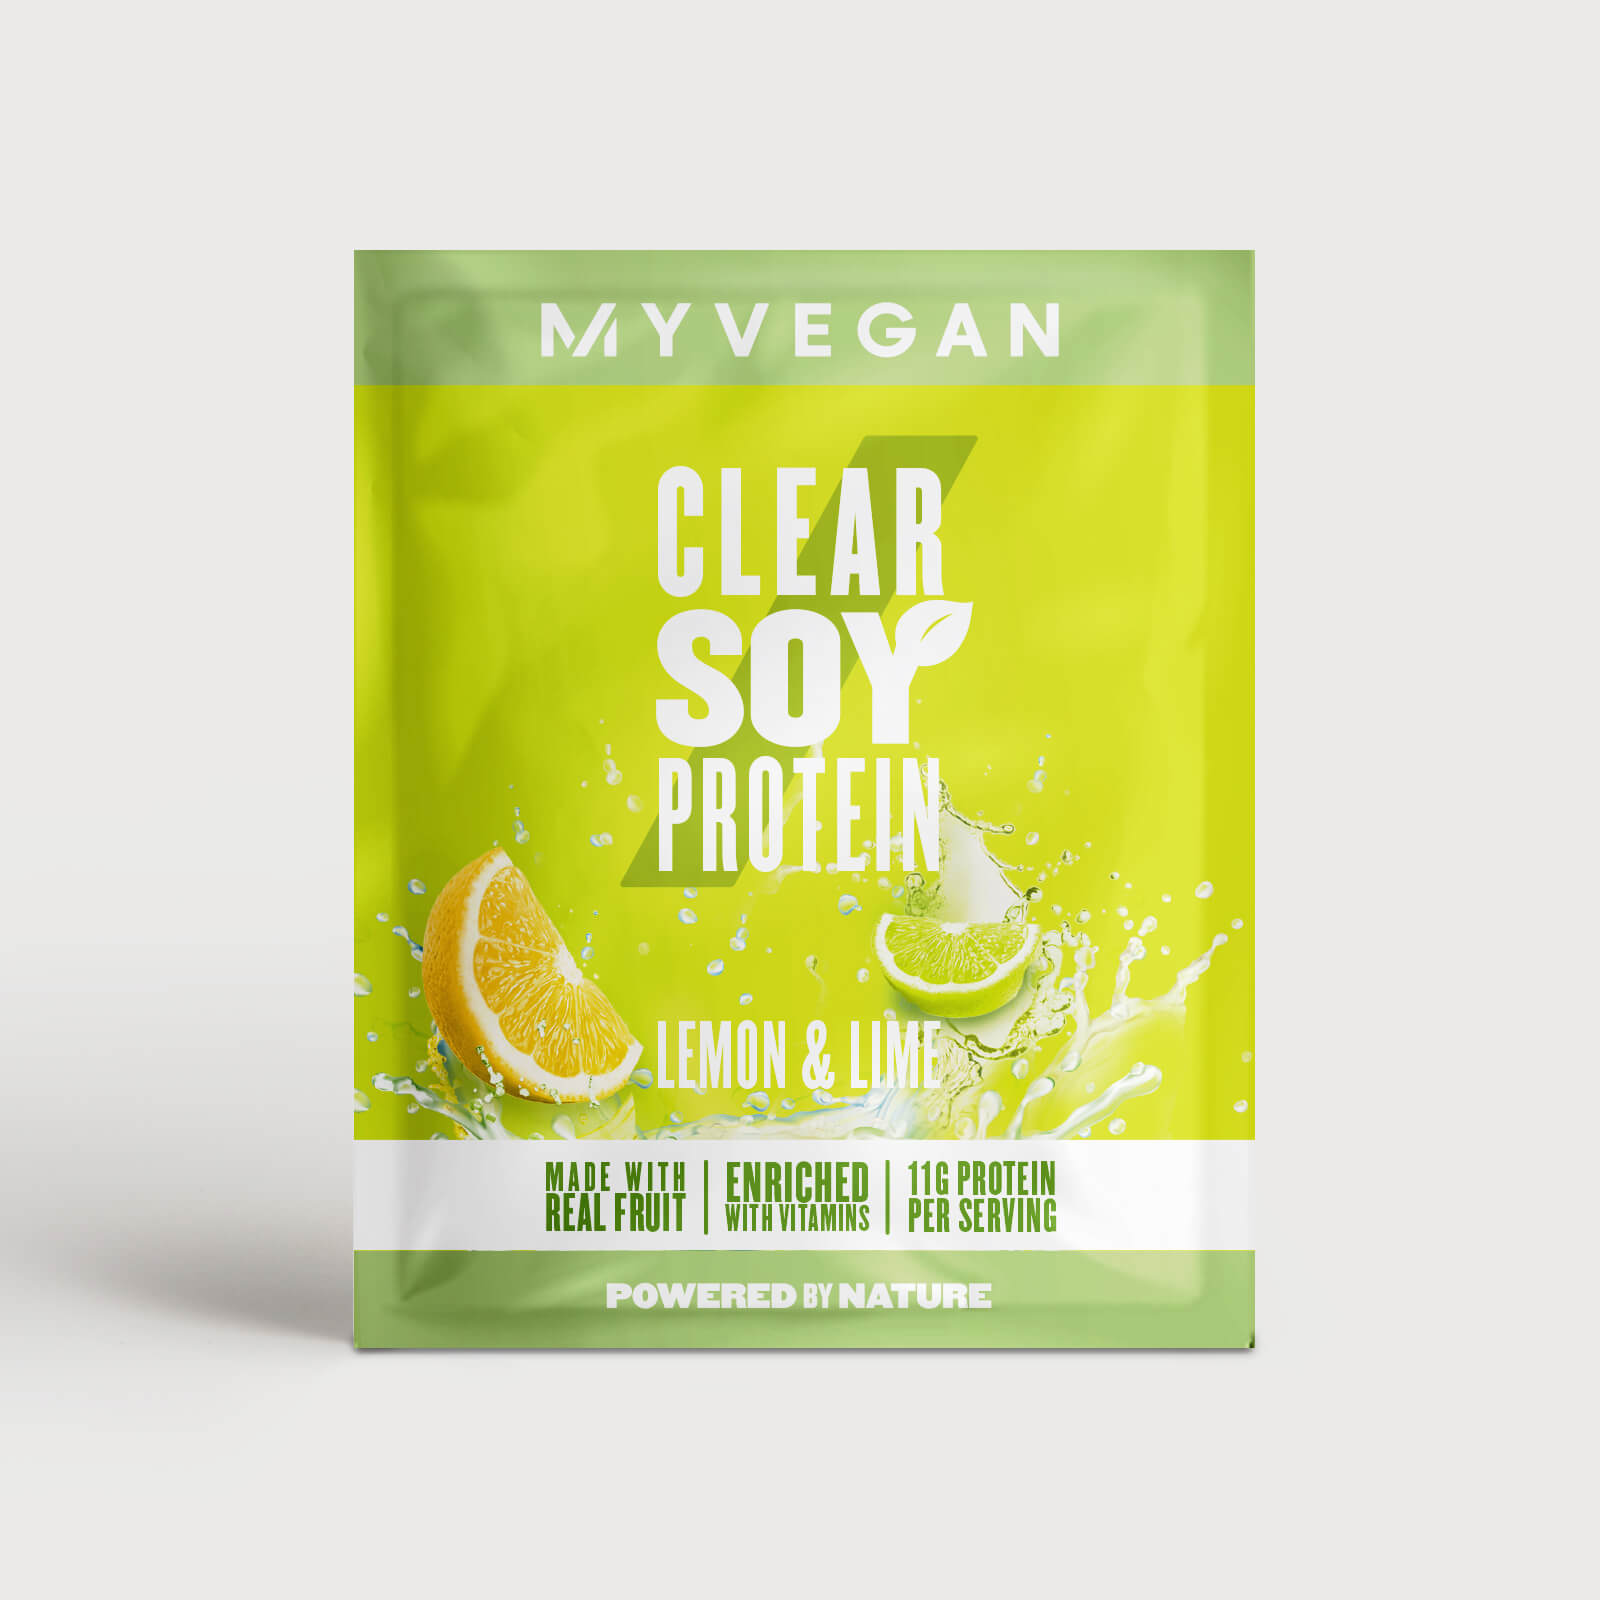 Myvegan Clear Soy Protein (Sample) - 17g - Lemon and Lime